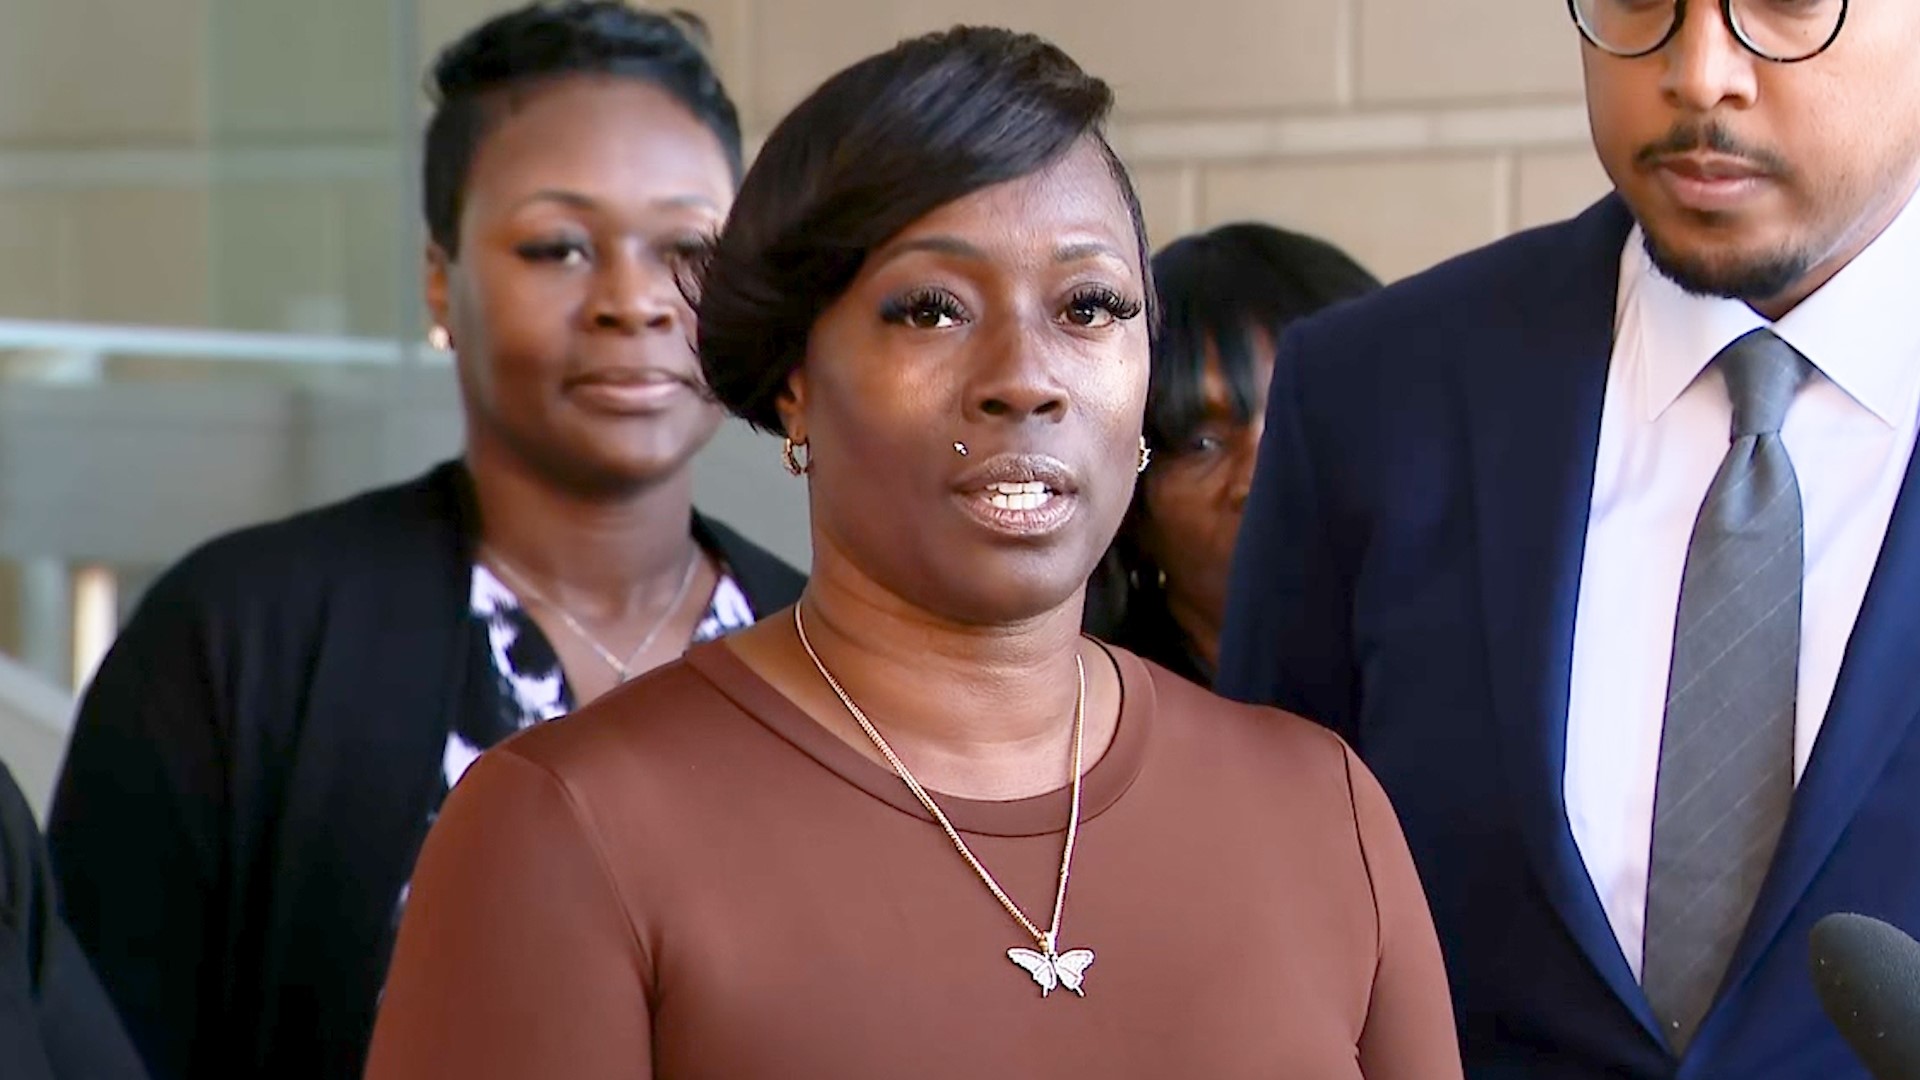 A Texas woman convicted of casting an illegal provisional ballot has had her conviction overturned. Crystal Mason said she wants people to know their rights.